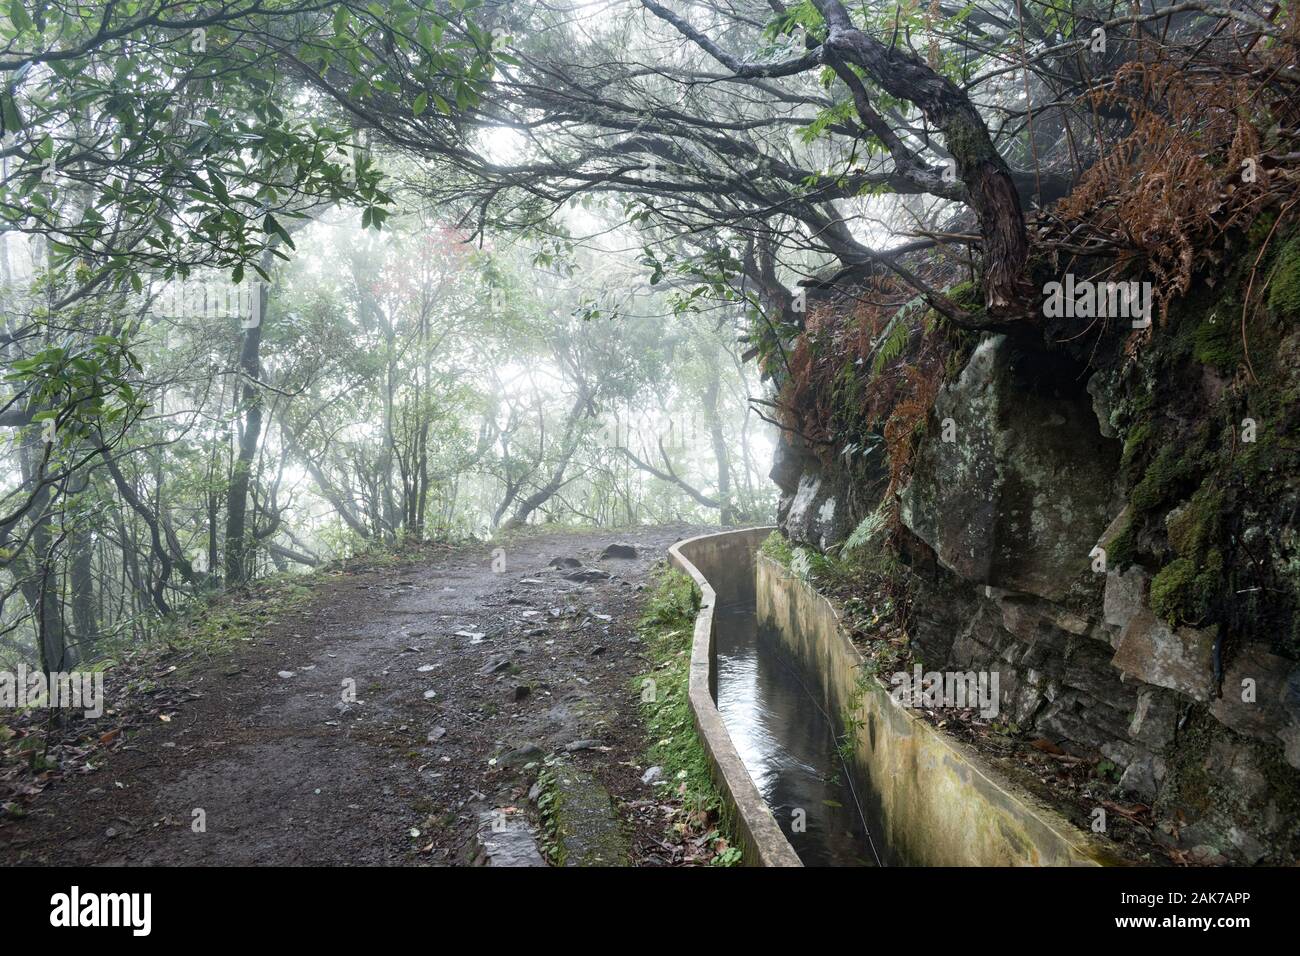 The Levada do Furado on Madeira Island, Portugal wiggles around a corner in the misty mountainside forest with sunlight bursting in through the trees. Stock Photo